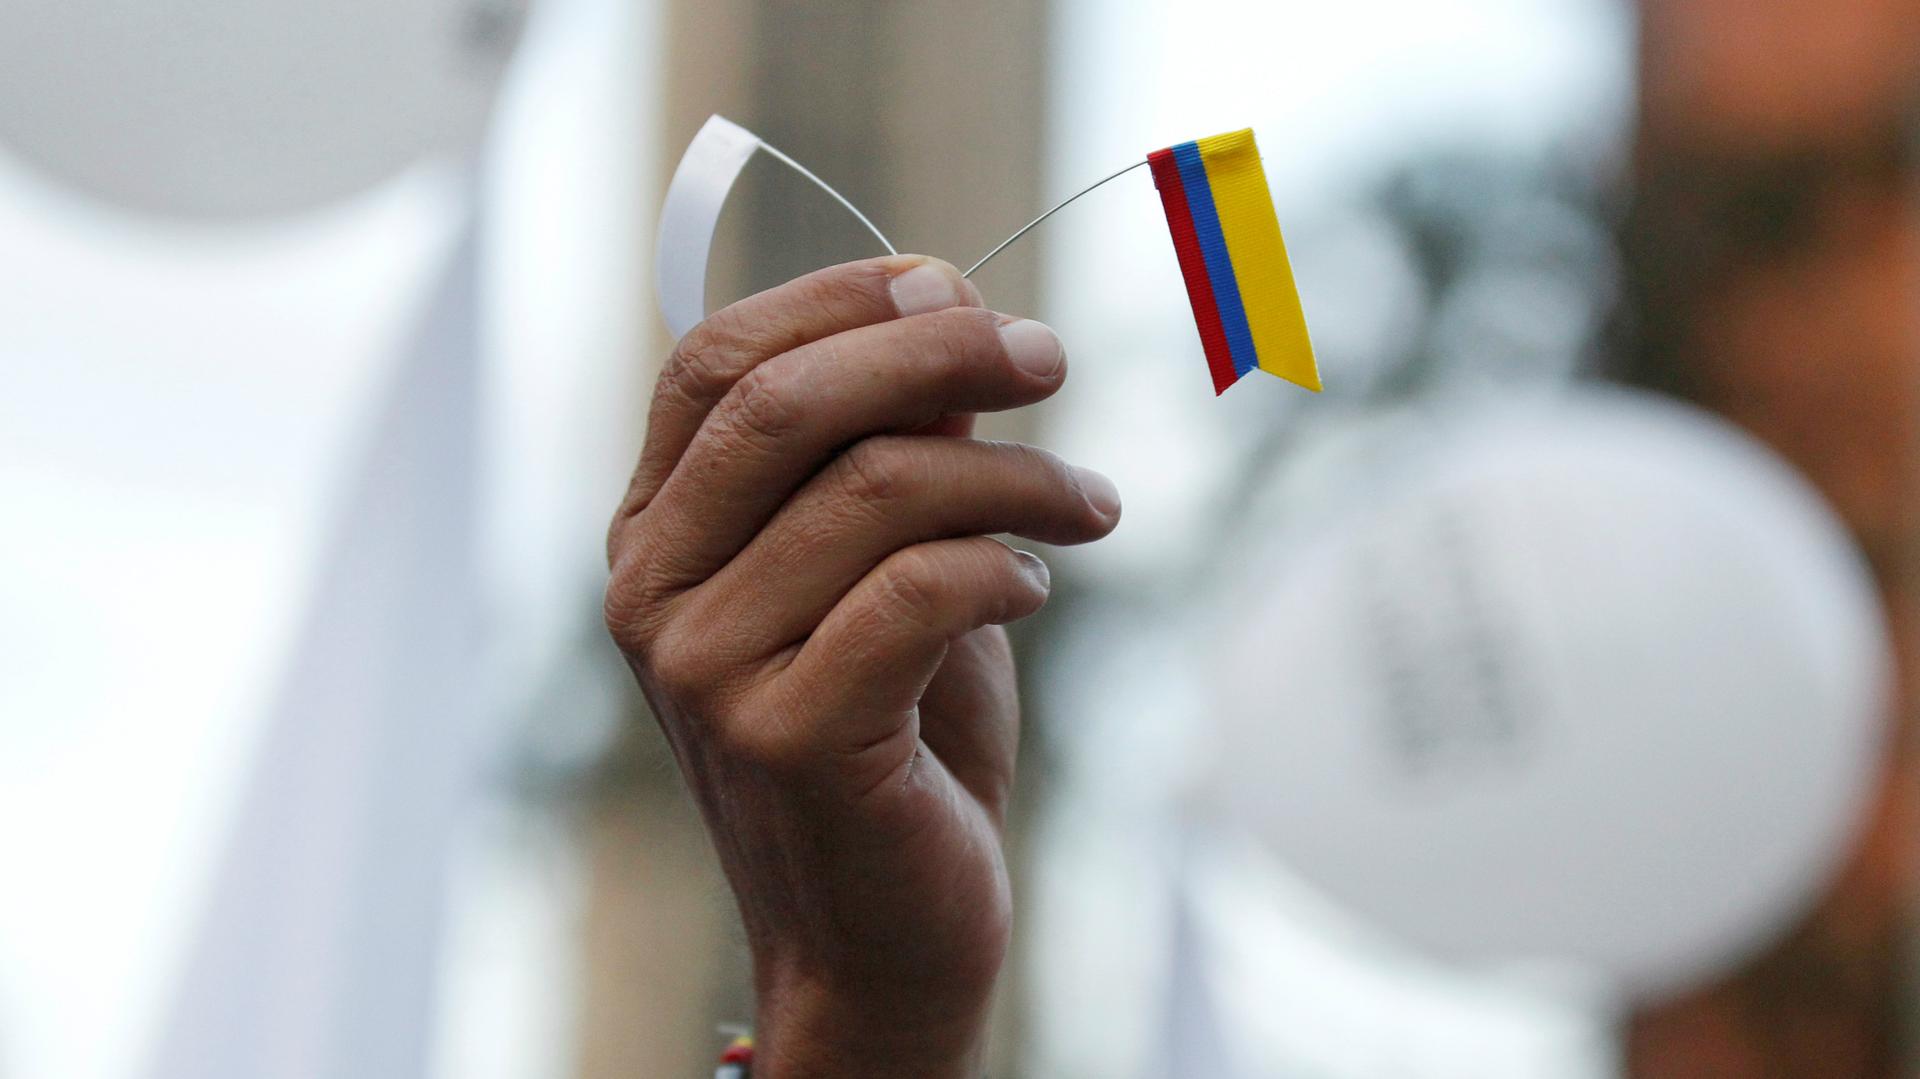 A demonstrator rallying in support of Colombia's peace agreement with the FARC holds a tiny flag during a march in Bogota, Colombia, on Nov. 15, 2016.